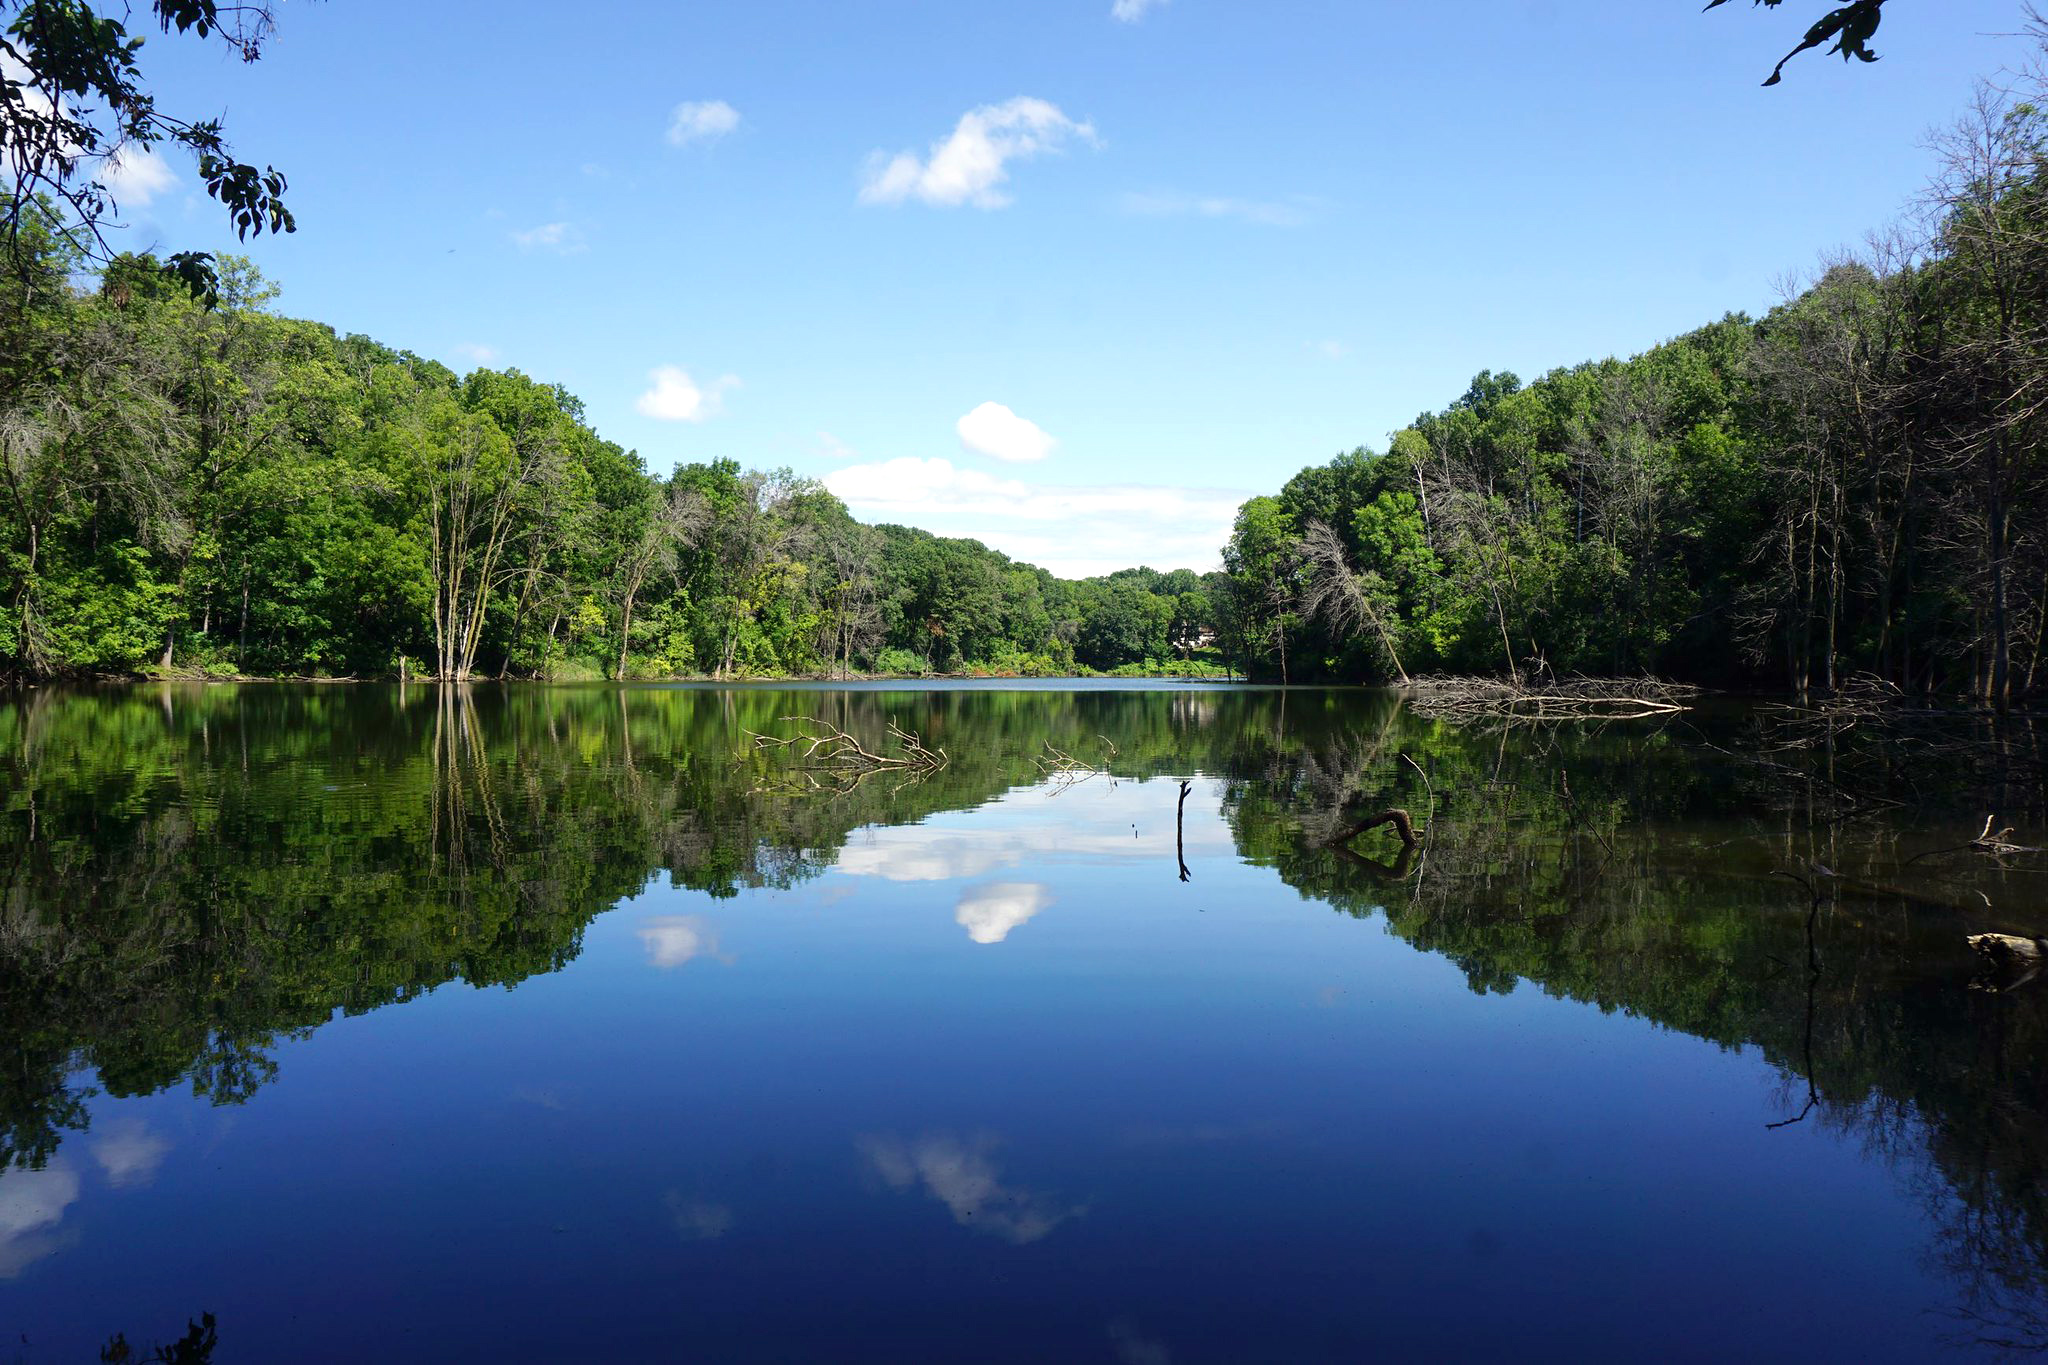 Lake at Seidl's Lake Park surrounded by forest